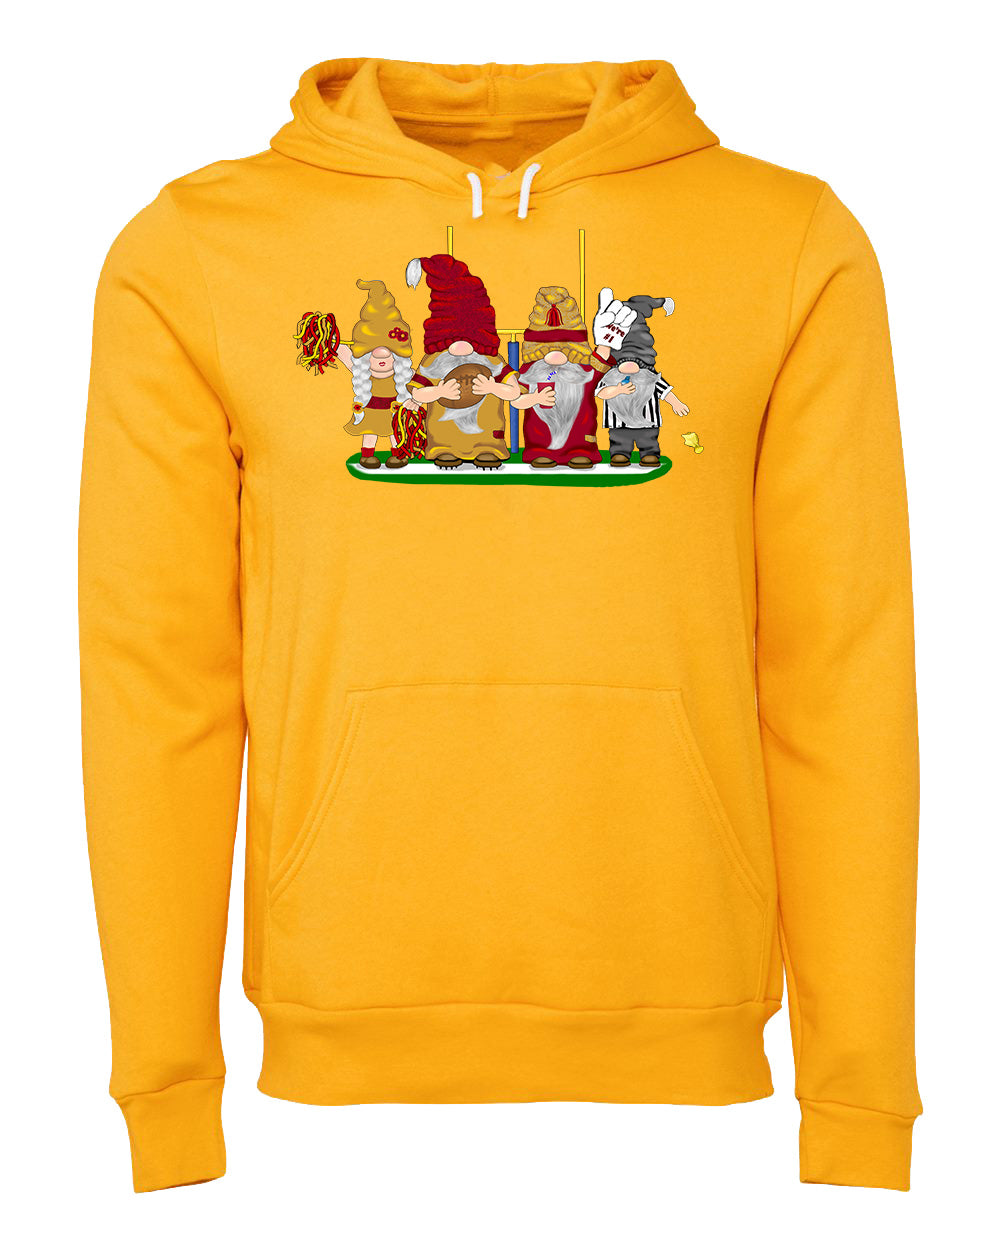 Burgundy & Gold Football Gnomes (similar to DC) on Unisex Hoodie